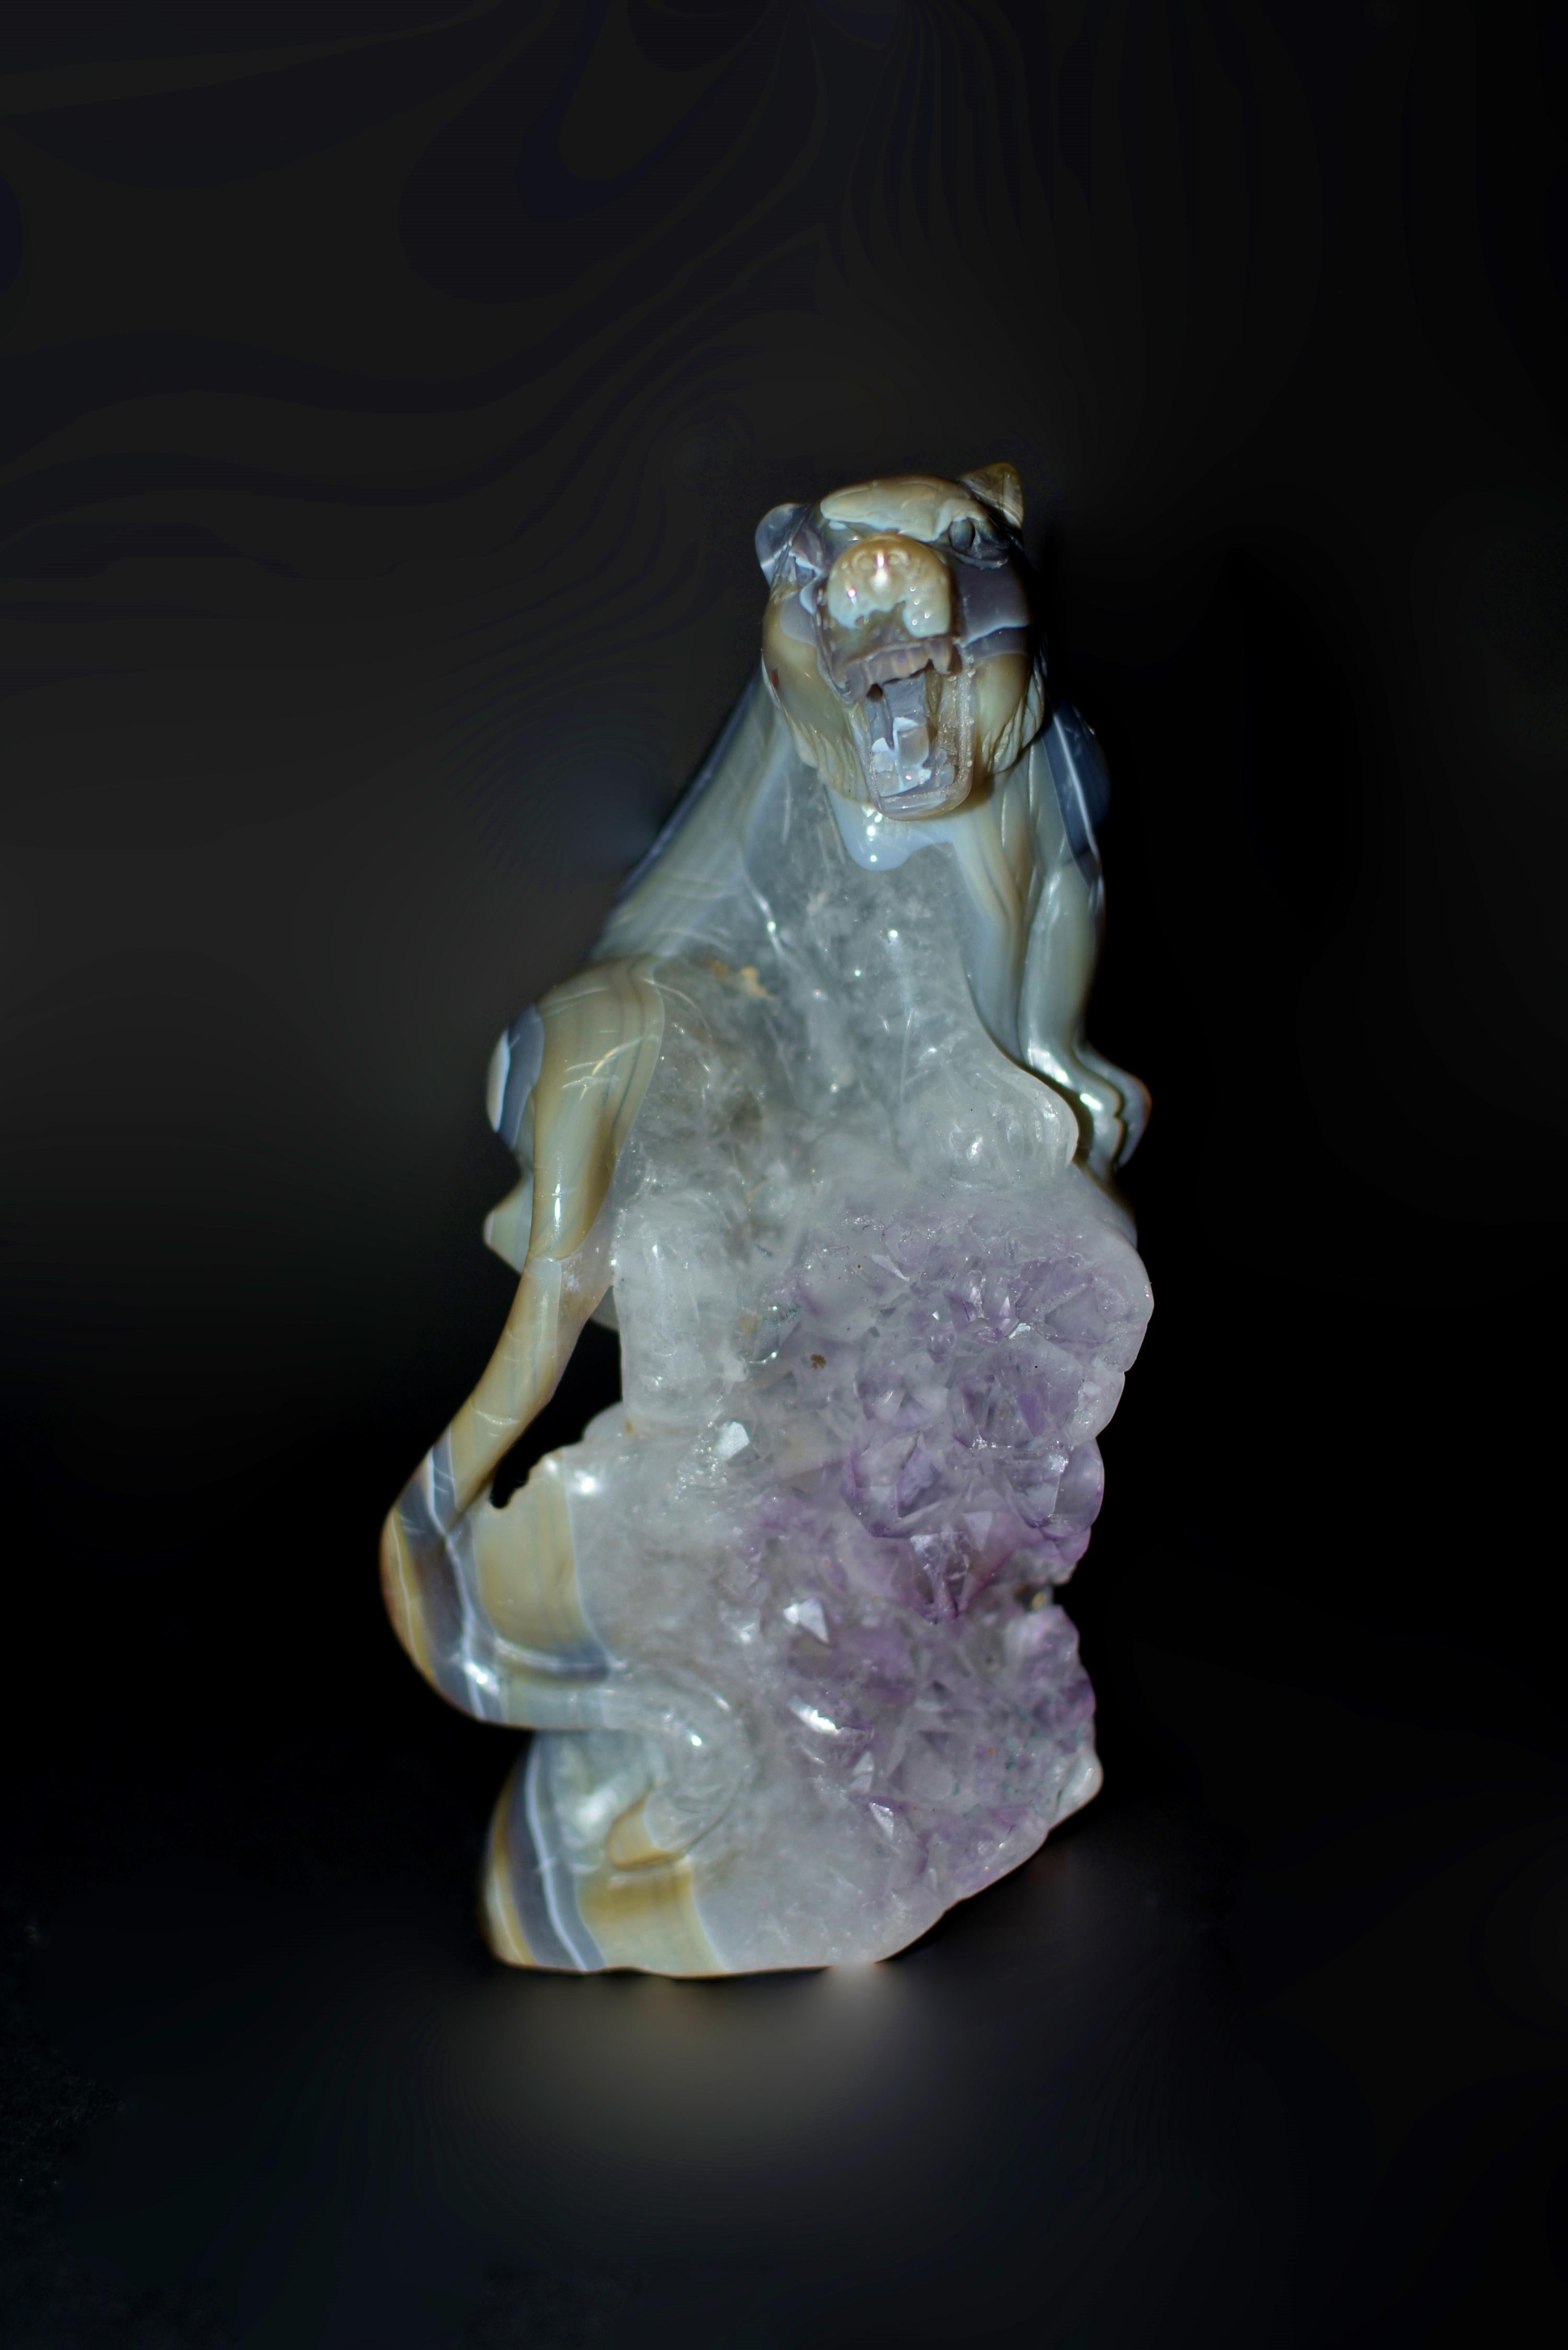 A beautiful Agate tiger on Amethyst rock sculpture, capturing the essence of raw power and untamed majesty. Poised upon a rocky outcrop of splendid purple amethyst, the tiger commands attention with its fierce gaze and open mouth, revealing menacing